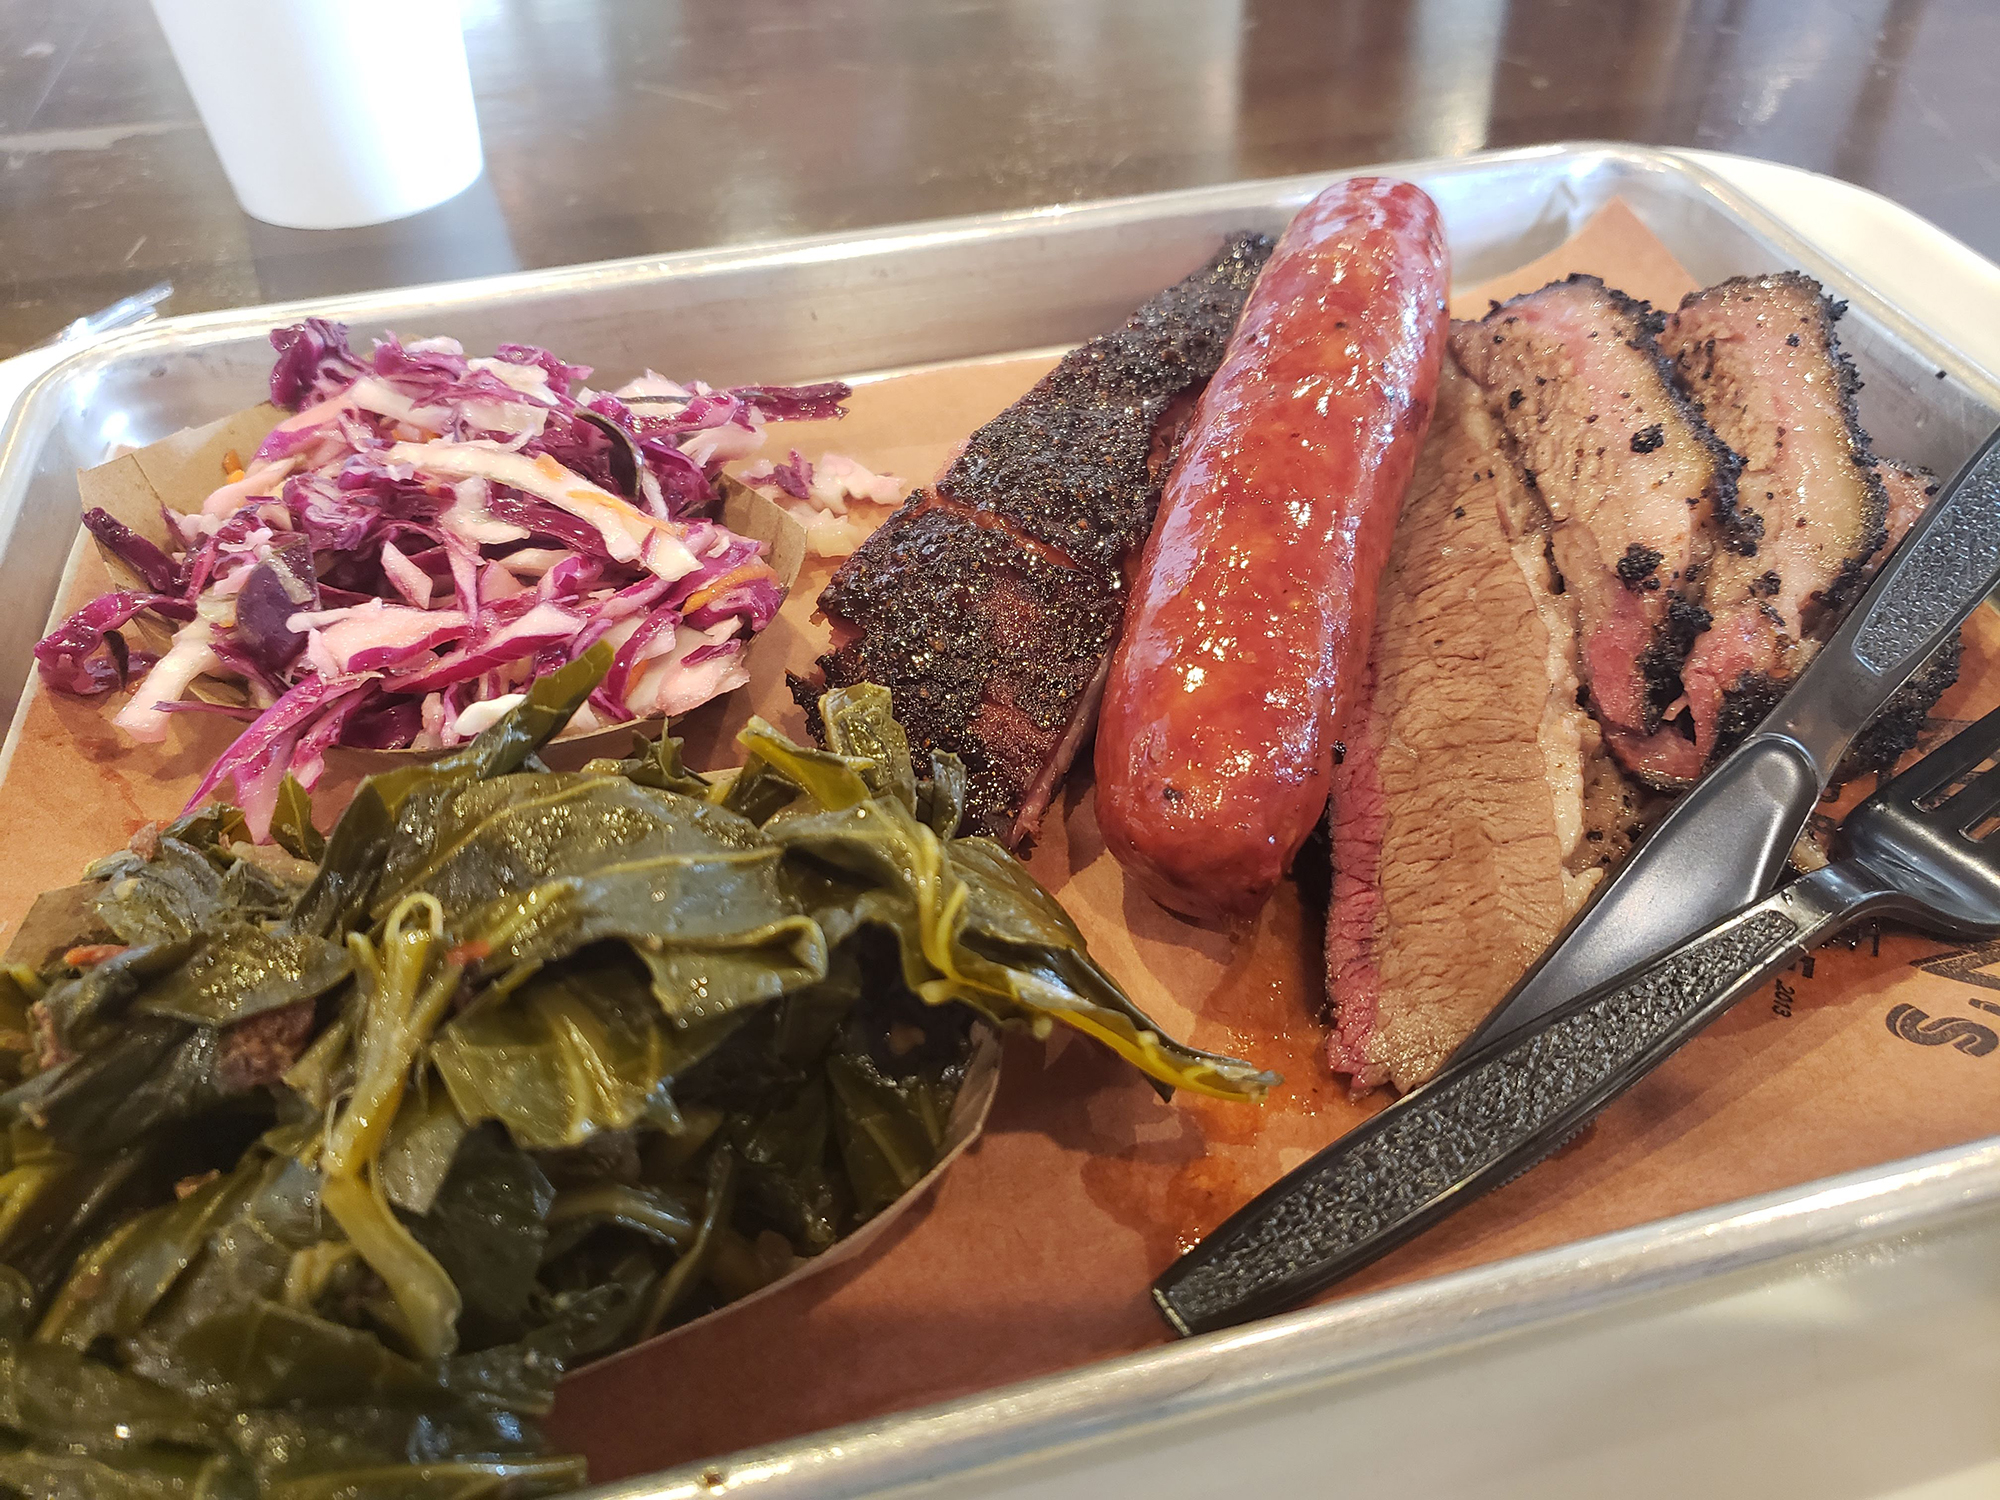 3 meat combo - Texas Sausage, Rib, Brisket with Greens and Red Cabbage Cole Slaw.